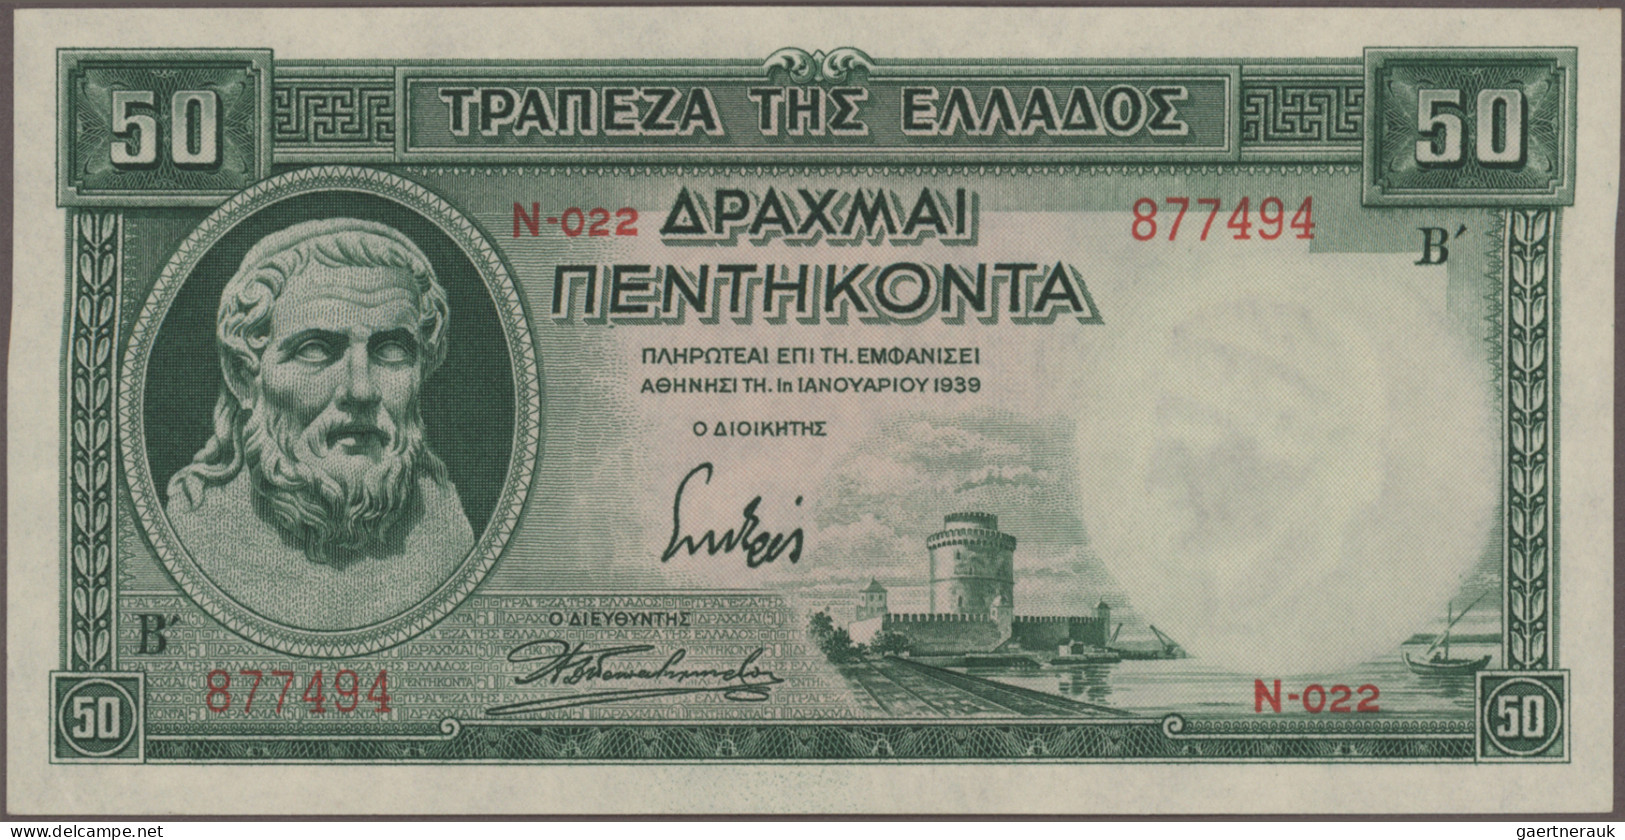 Greece: Bank of Greece, huge lot with 29 banknotes, series 1928-1944, comprising